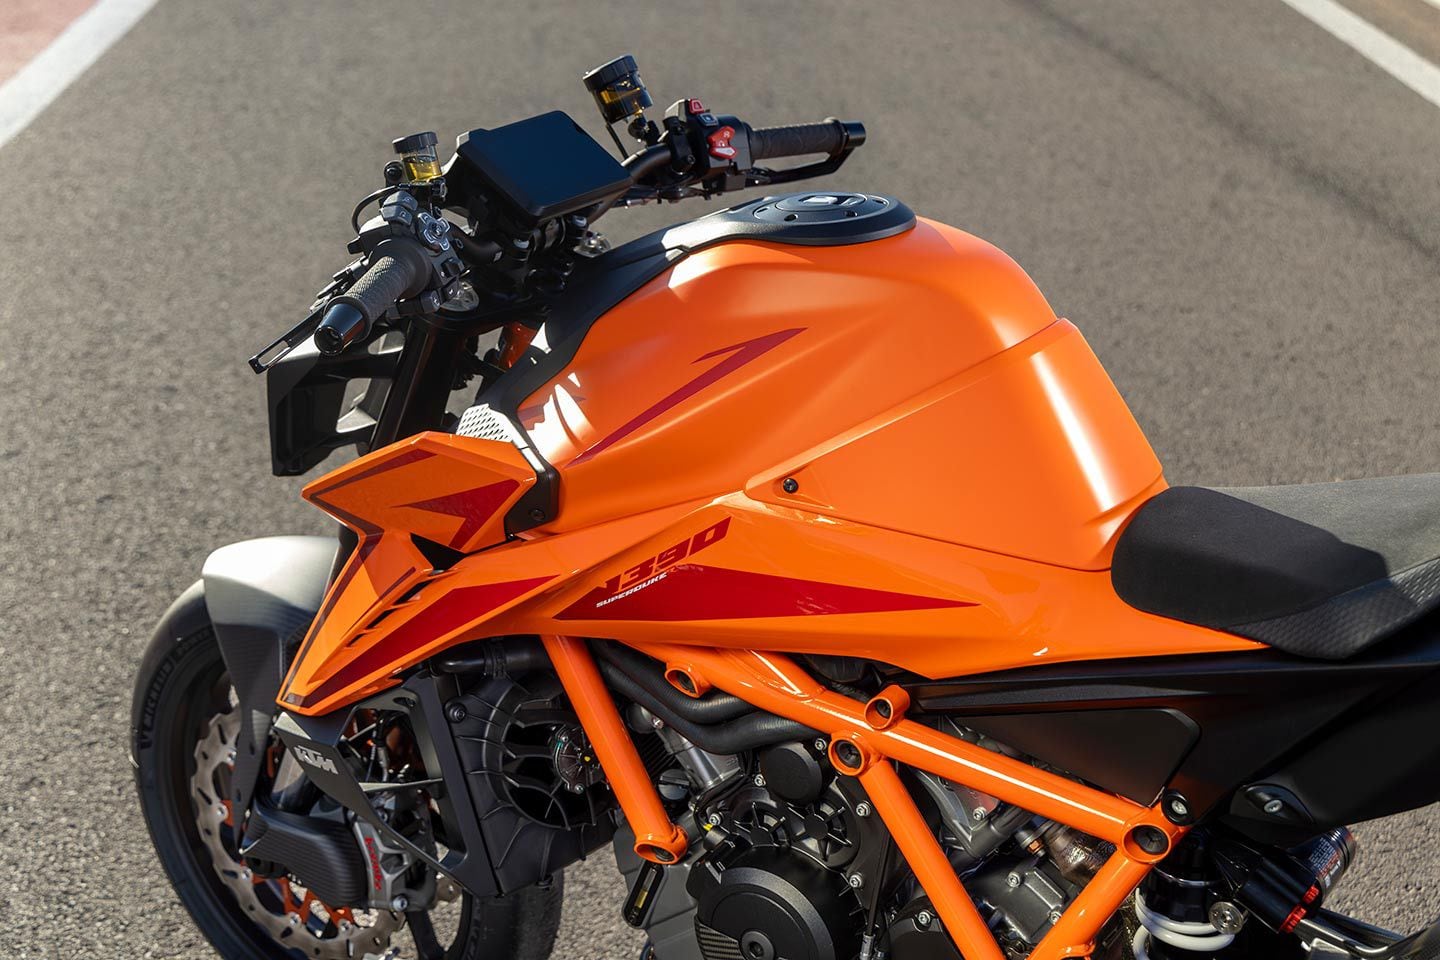 The 2024 Super Duke has a 0.4-gallon-larger fuel tank and a few new styling touches, like winglets (just below the tank spoiler). Yes, this is a bike made for wheelies, but with winglets that are intended to keep the front down. You could say the same thing about traction control too.